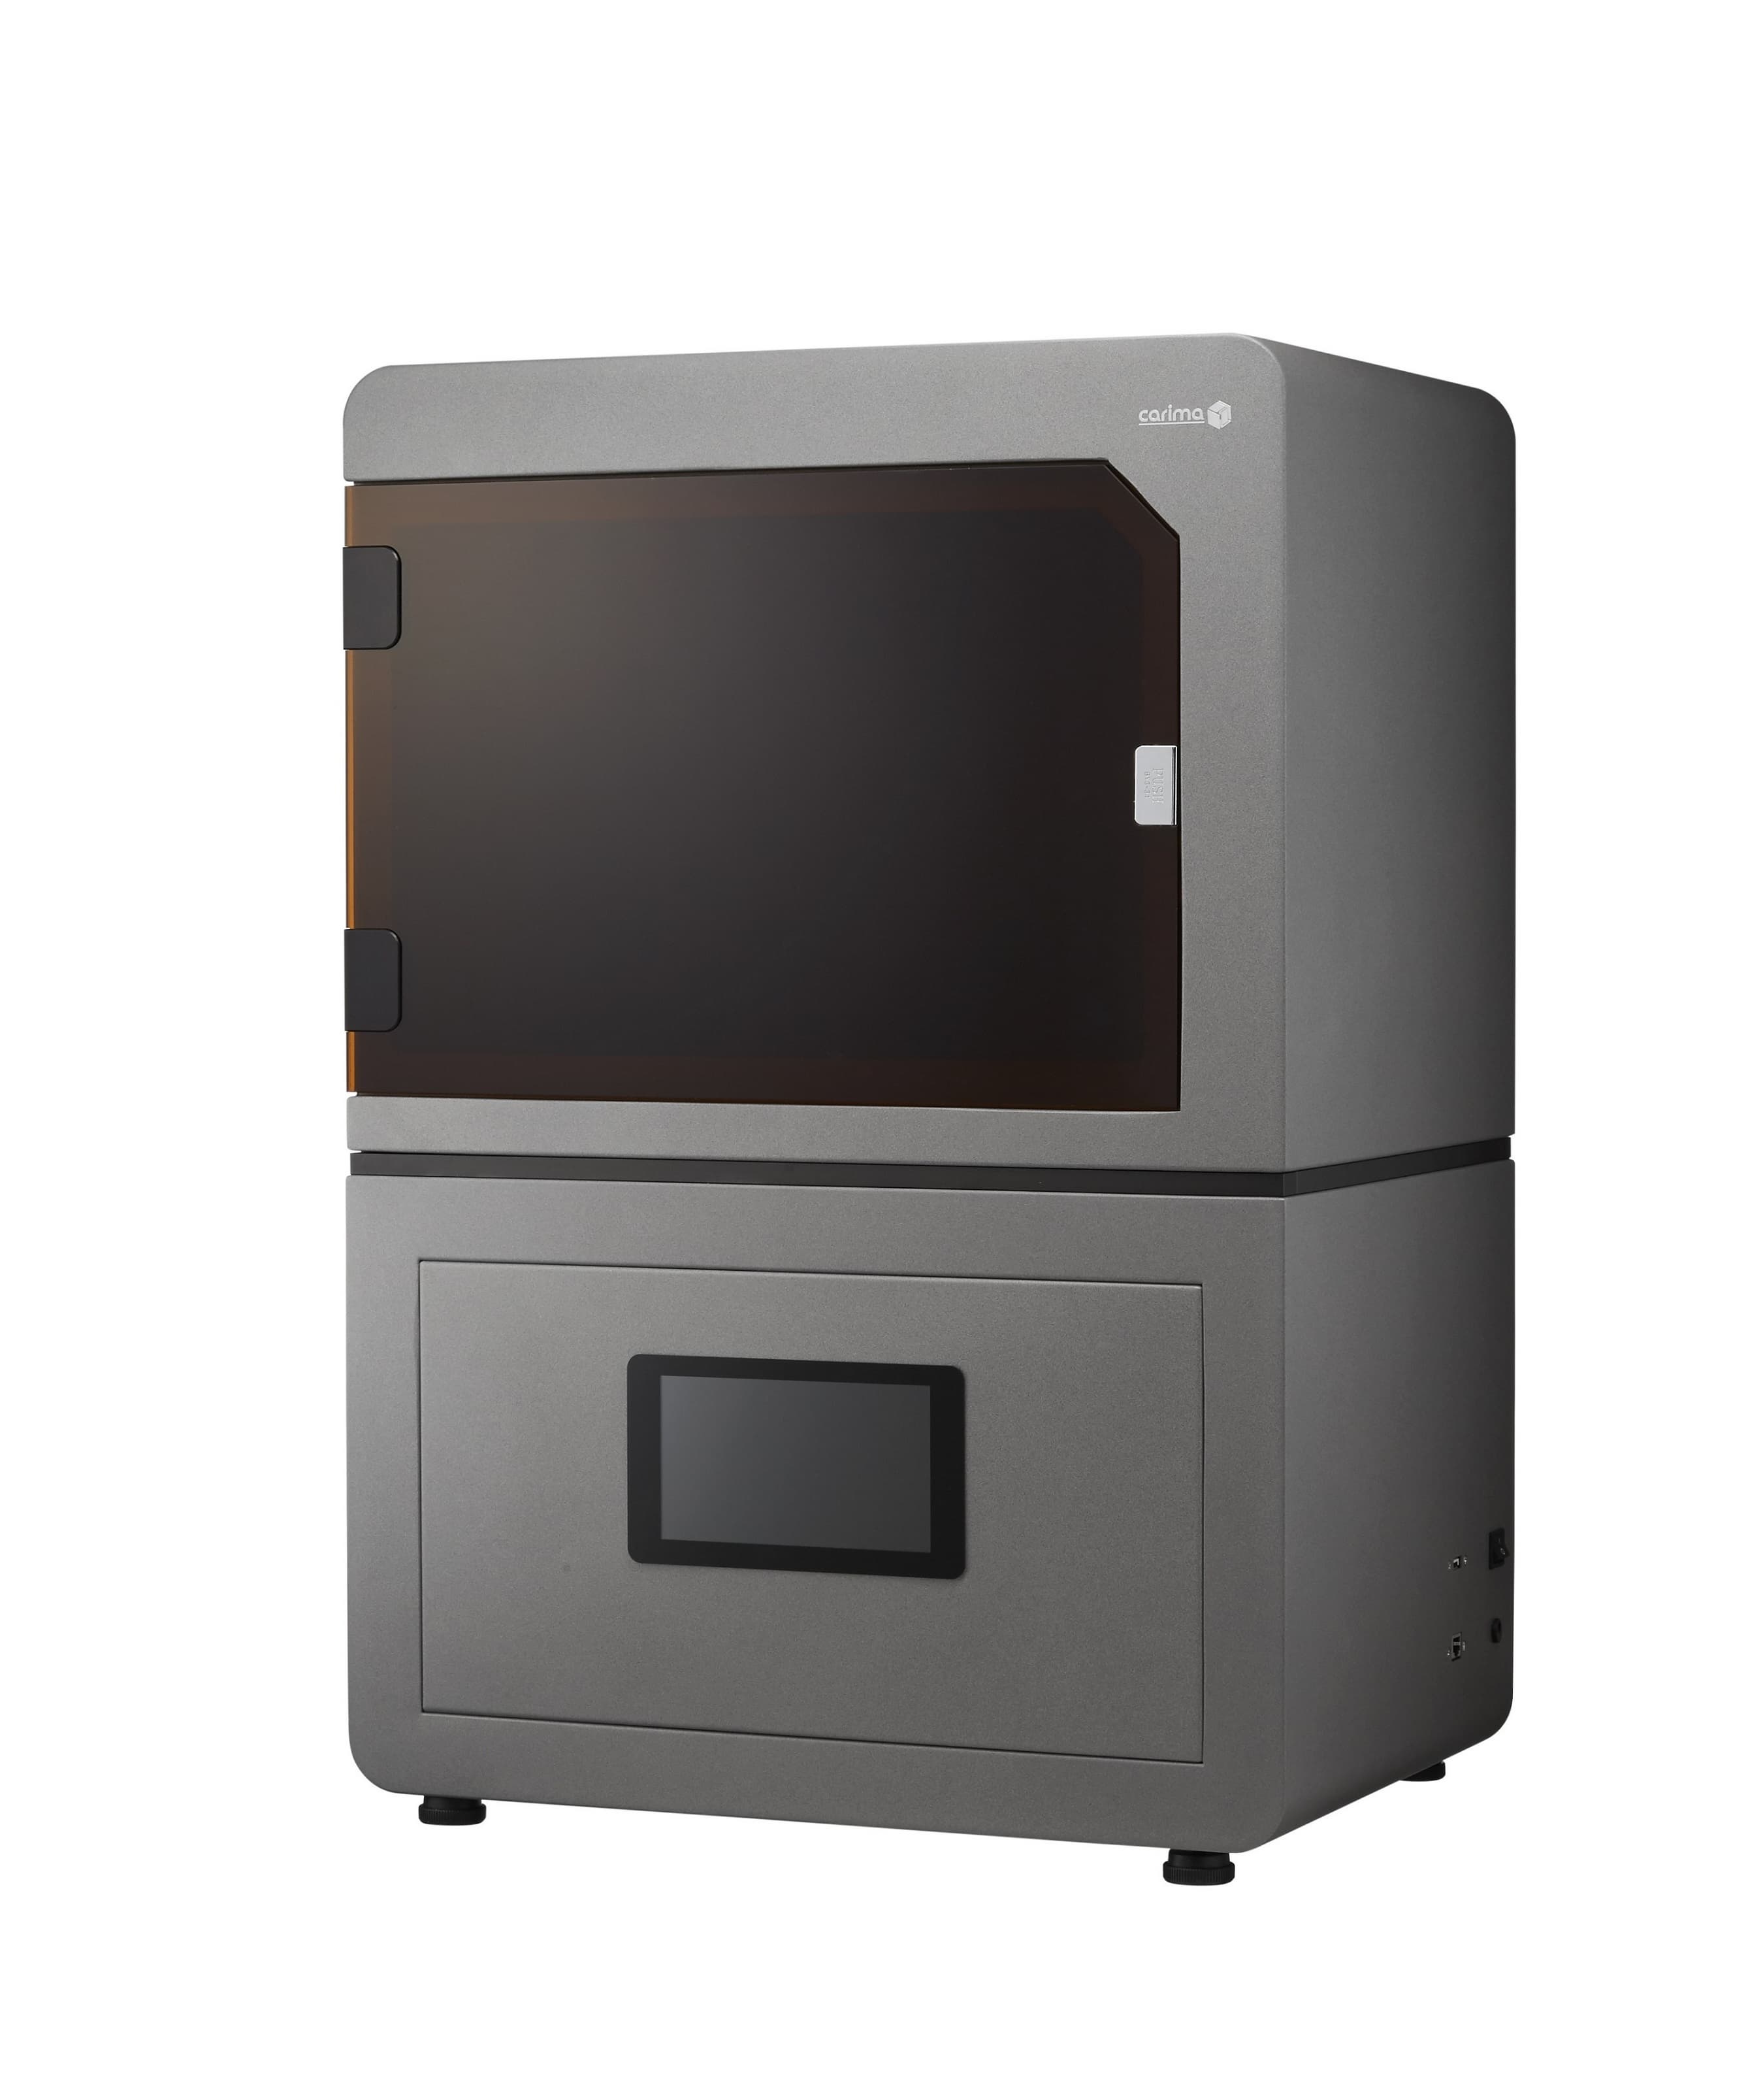 TM200 _ DLP 3D Printer specialized in Dental and Industrial